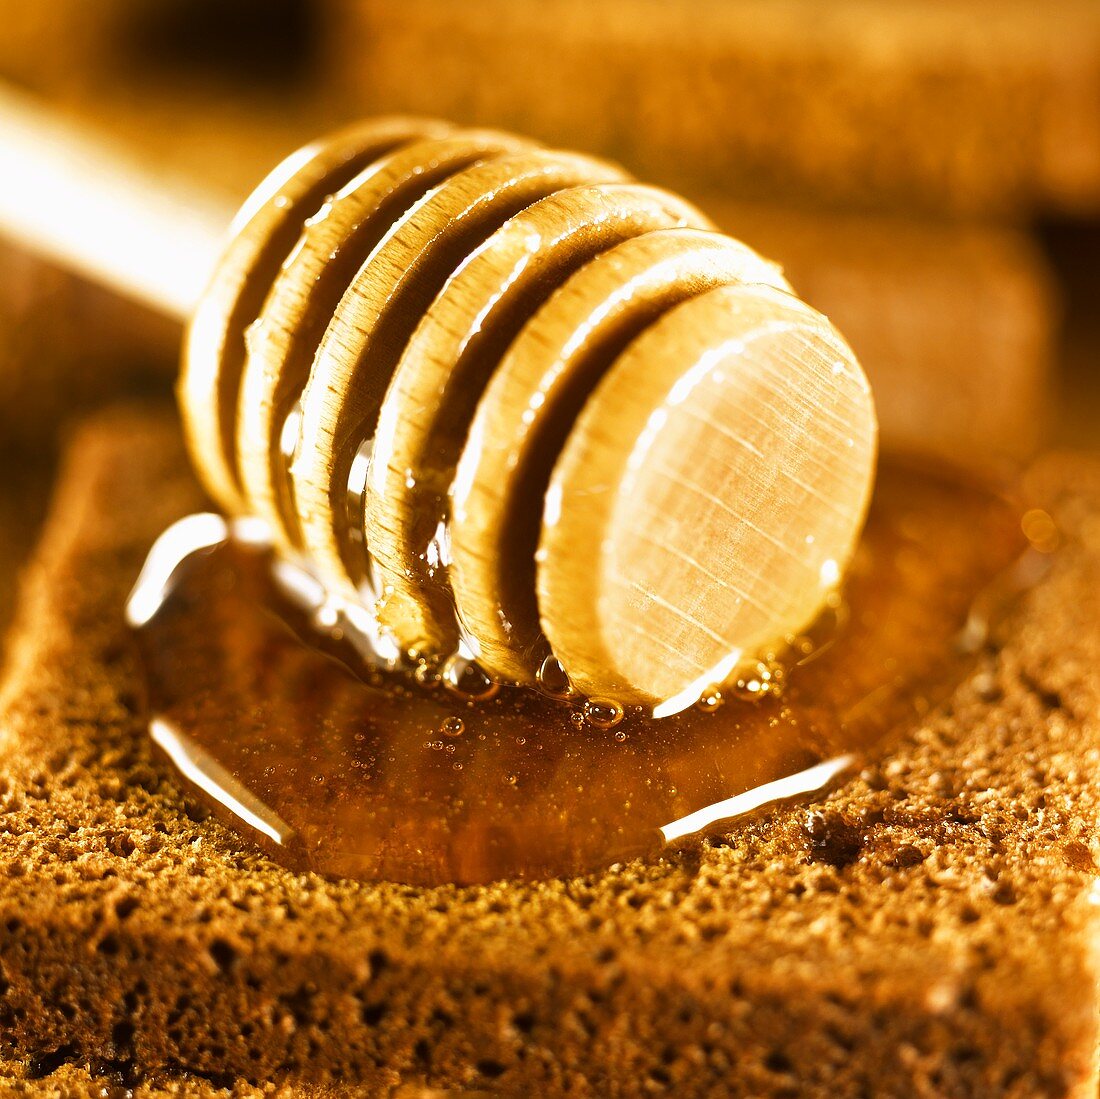 Honey dipper and honey on wholemeal bread